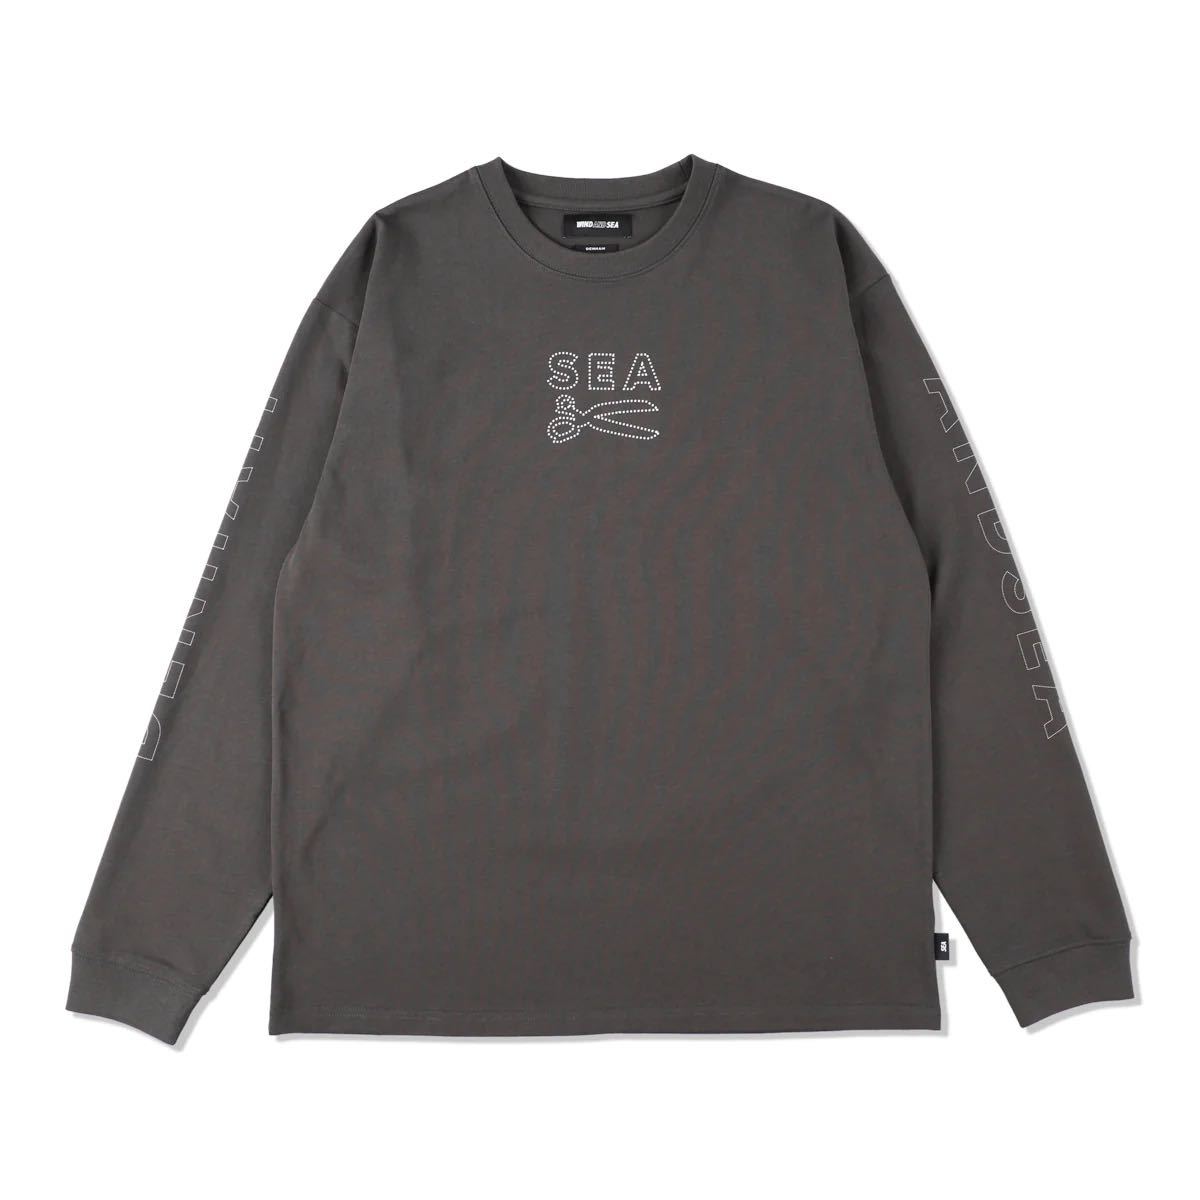 WIND AND SEA UMBRO × WDS S/S GAME SHIRT｜PayPayフリマ